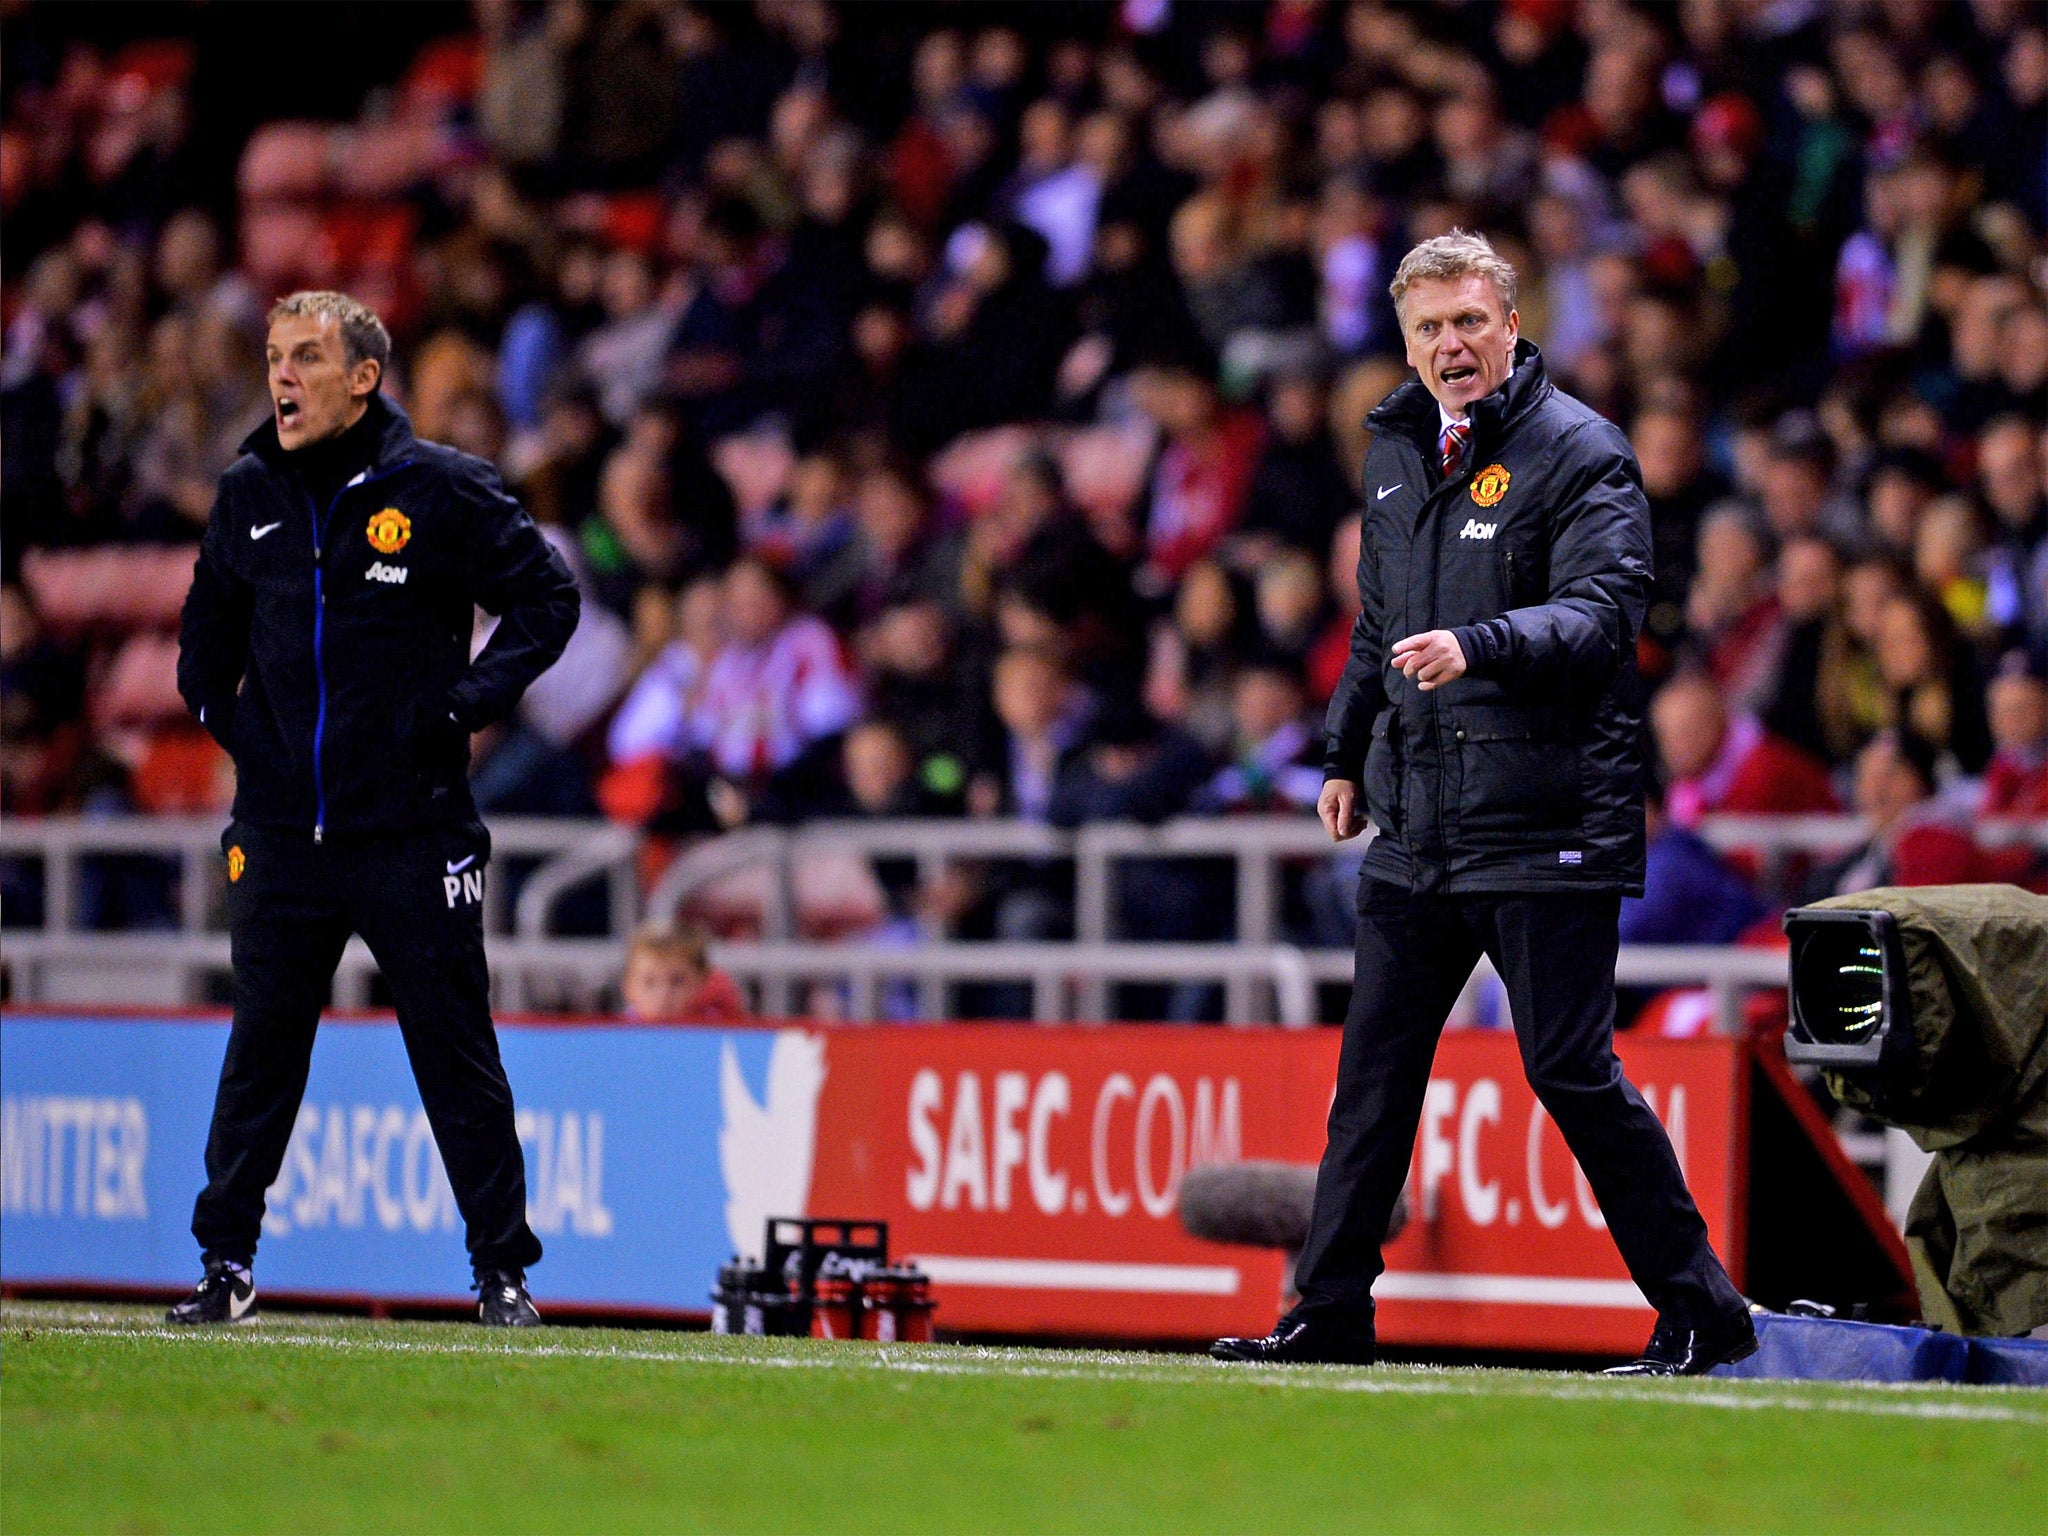 David Moyes and Phillip Neville bark instructions from the sideline